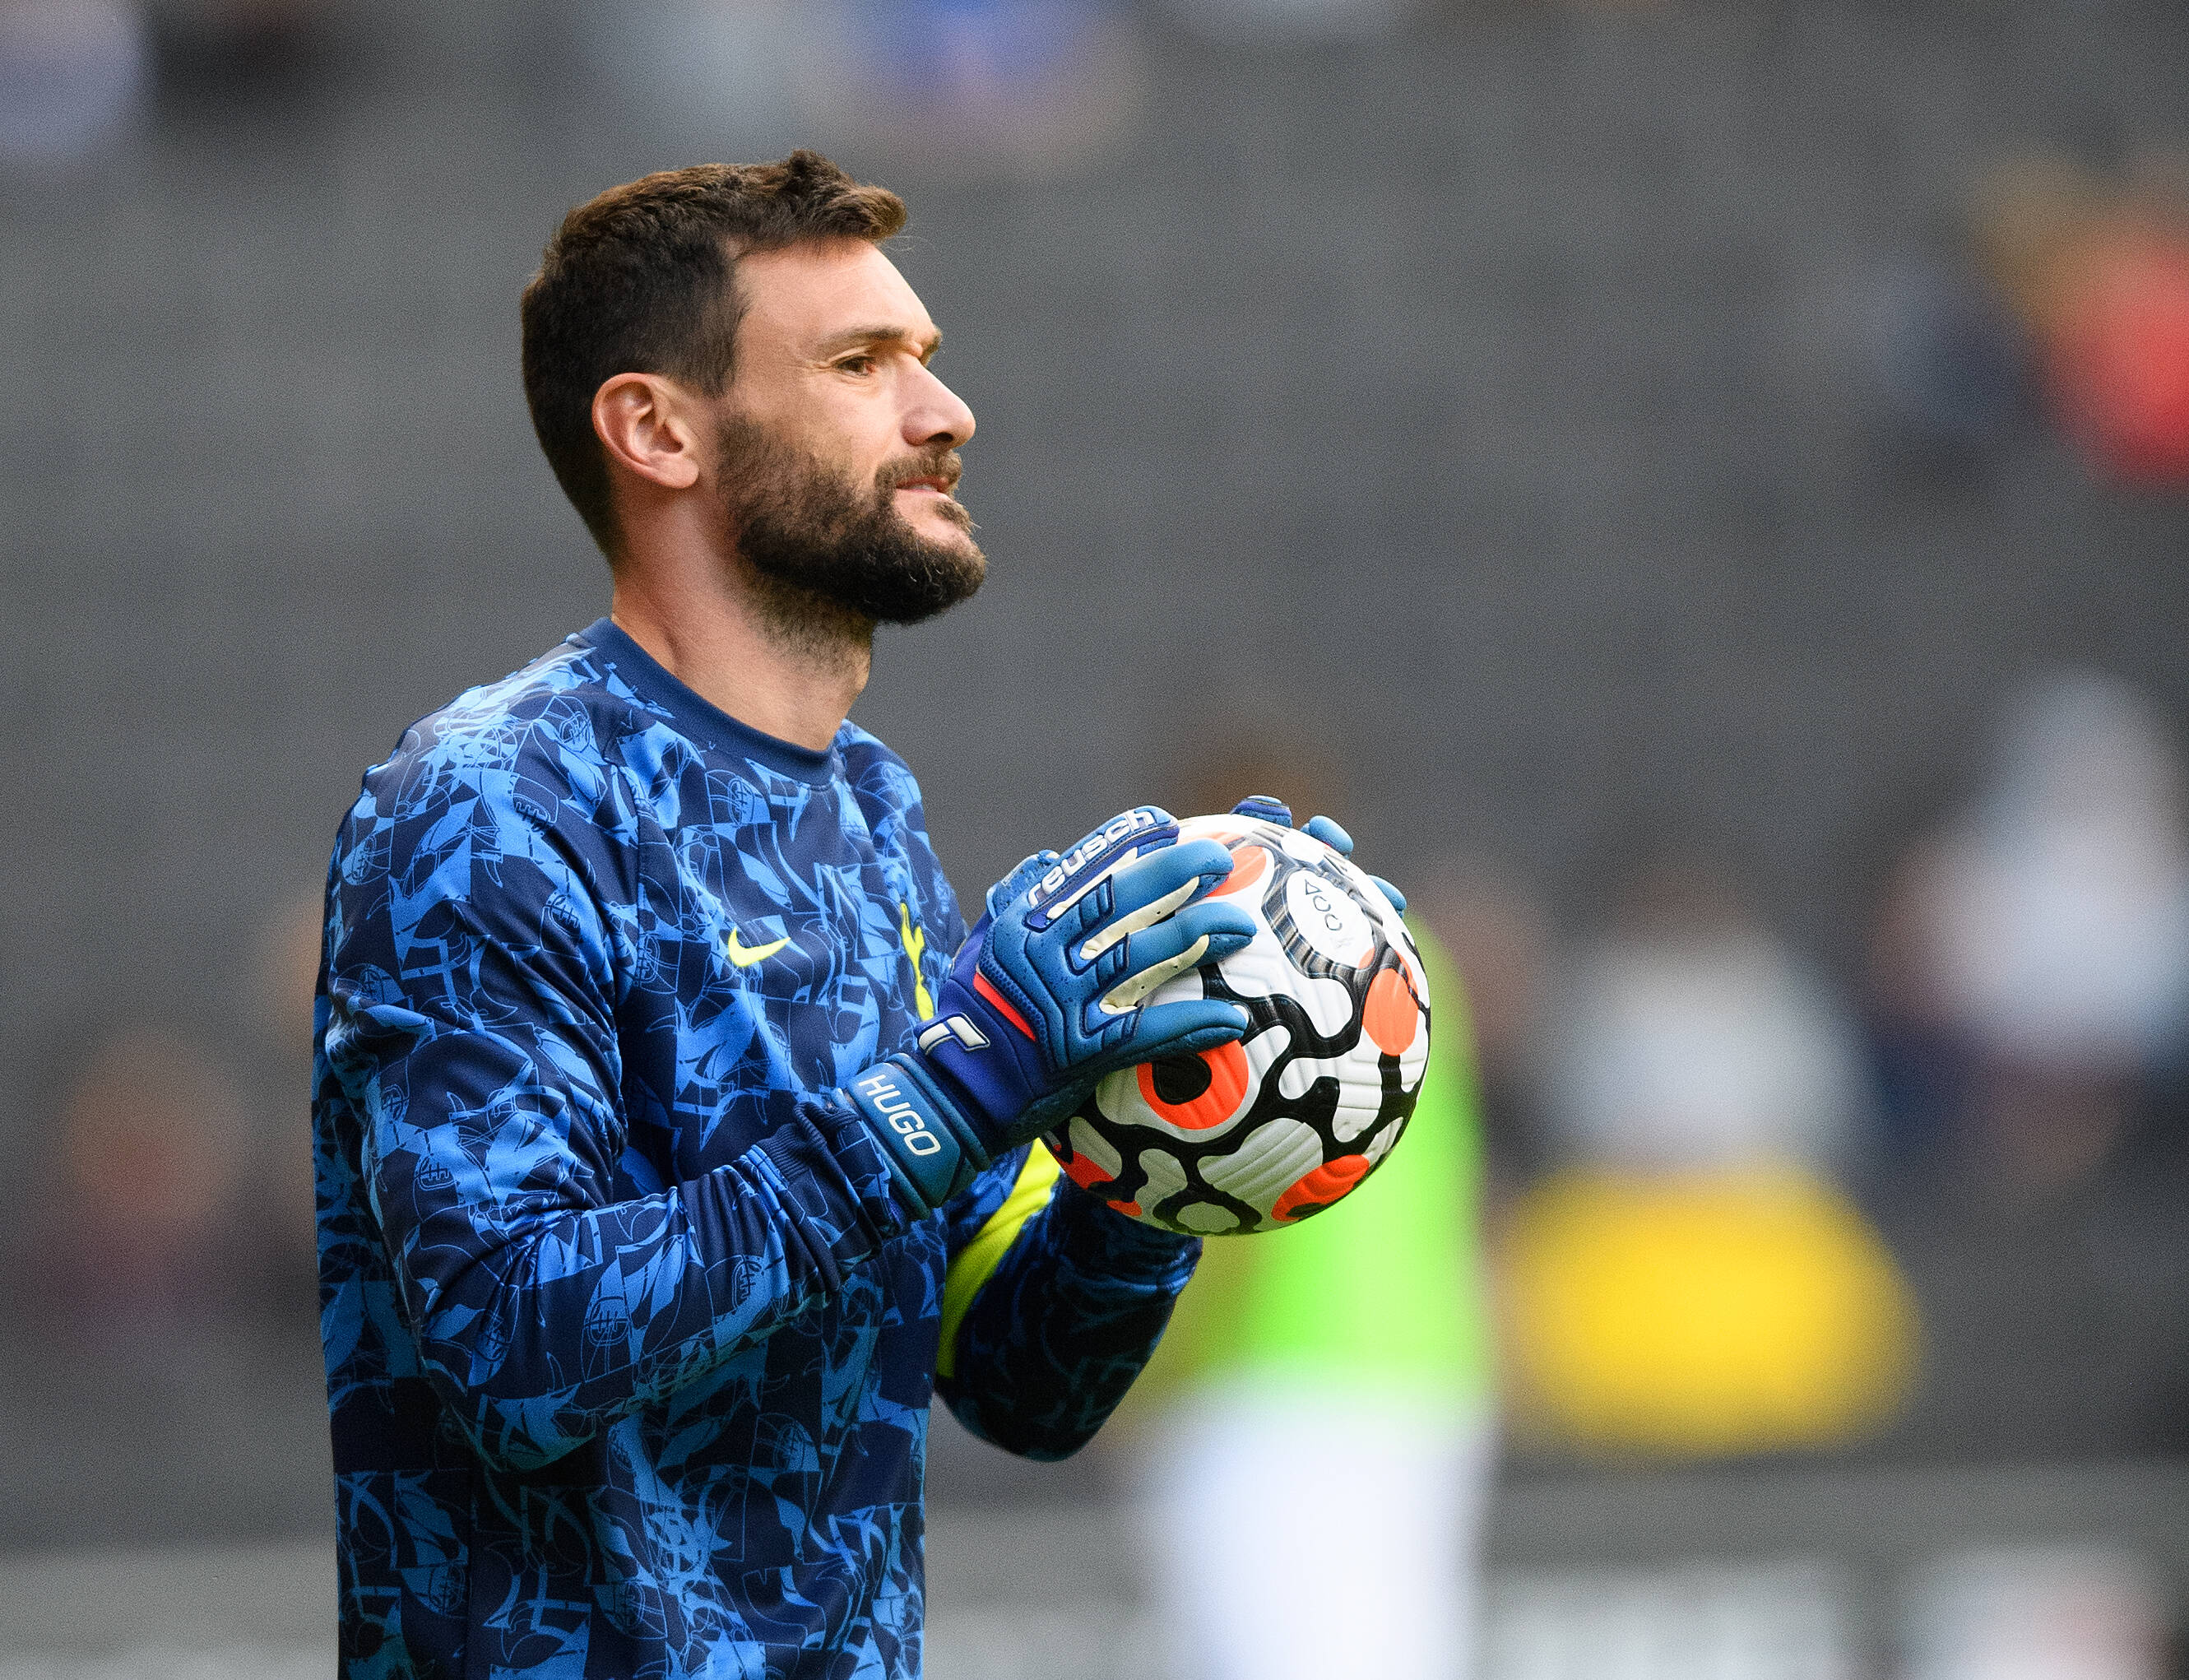 Spurs looking at multiple keepers including 2 cap ace; Lloris expected to leave CaughtOffside